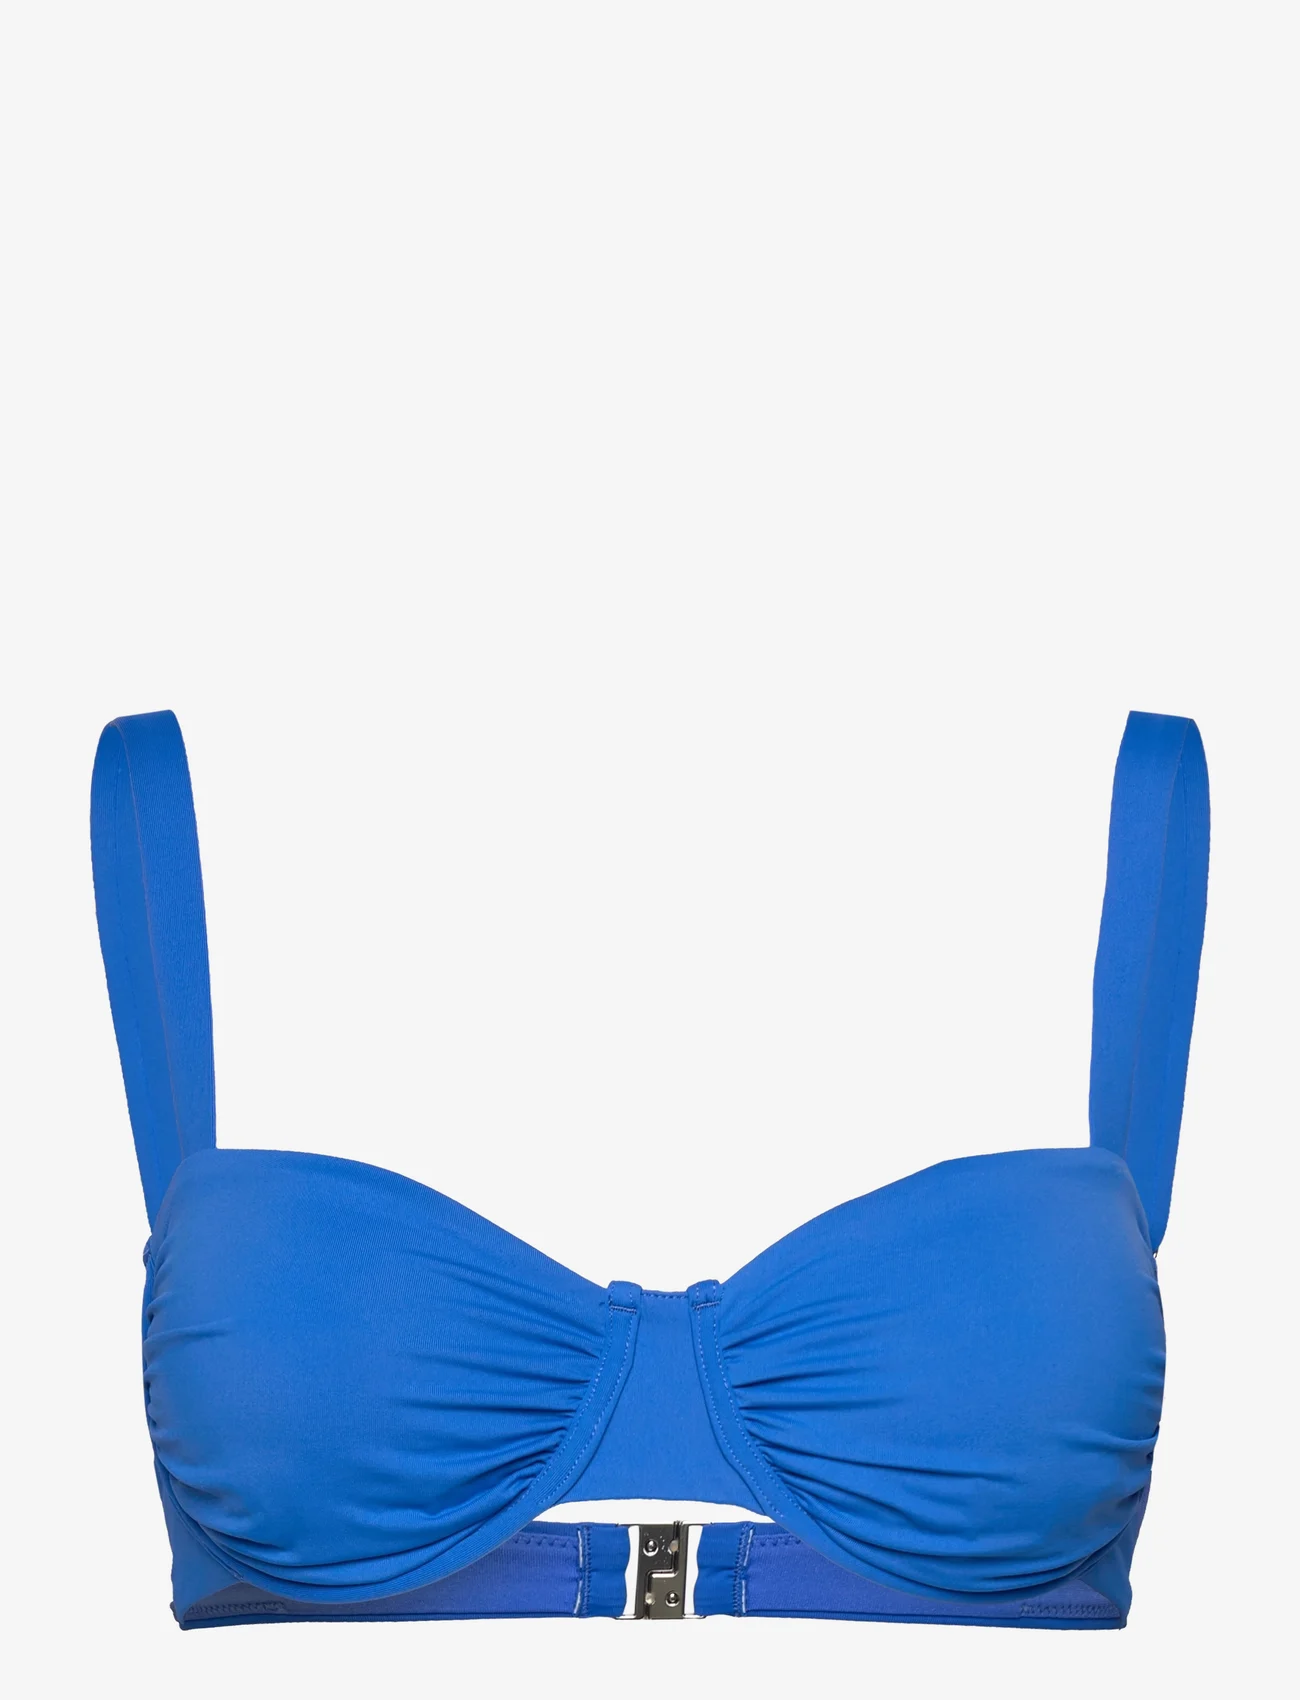 Seafolly - S.Collective Ruched Underwire Bra - bikinitoppar med bygel - azure - 0